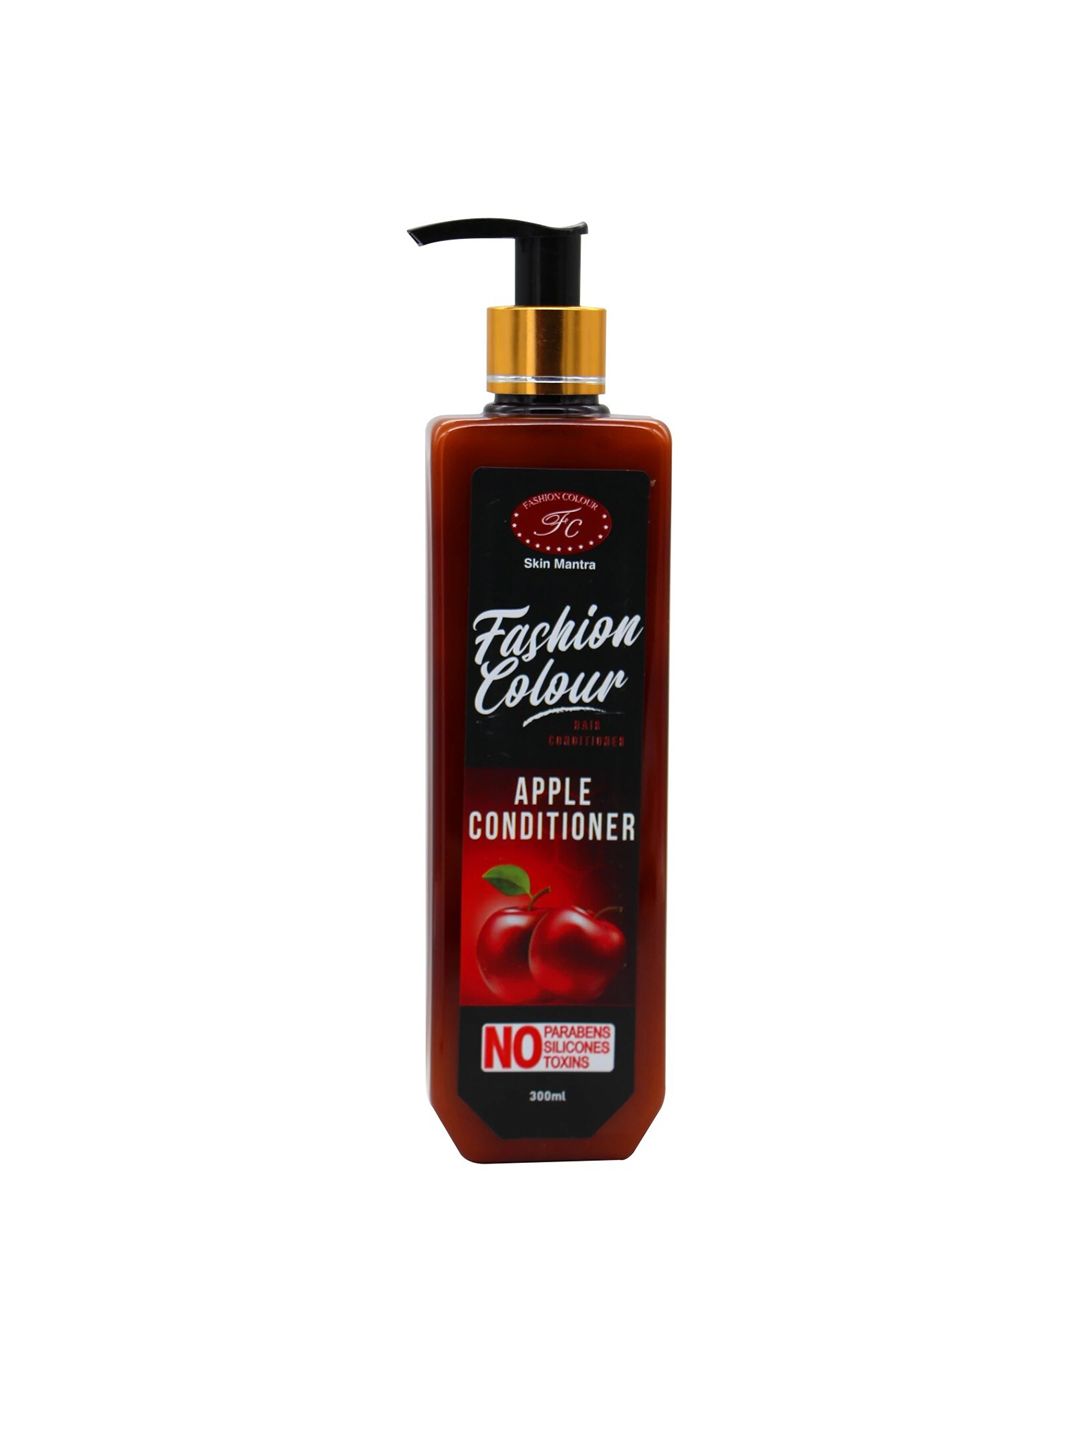 Fashion Colour Apple Conditioner for Smooth Hair - 300ml Price in India